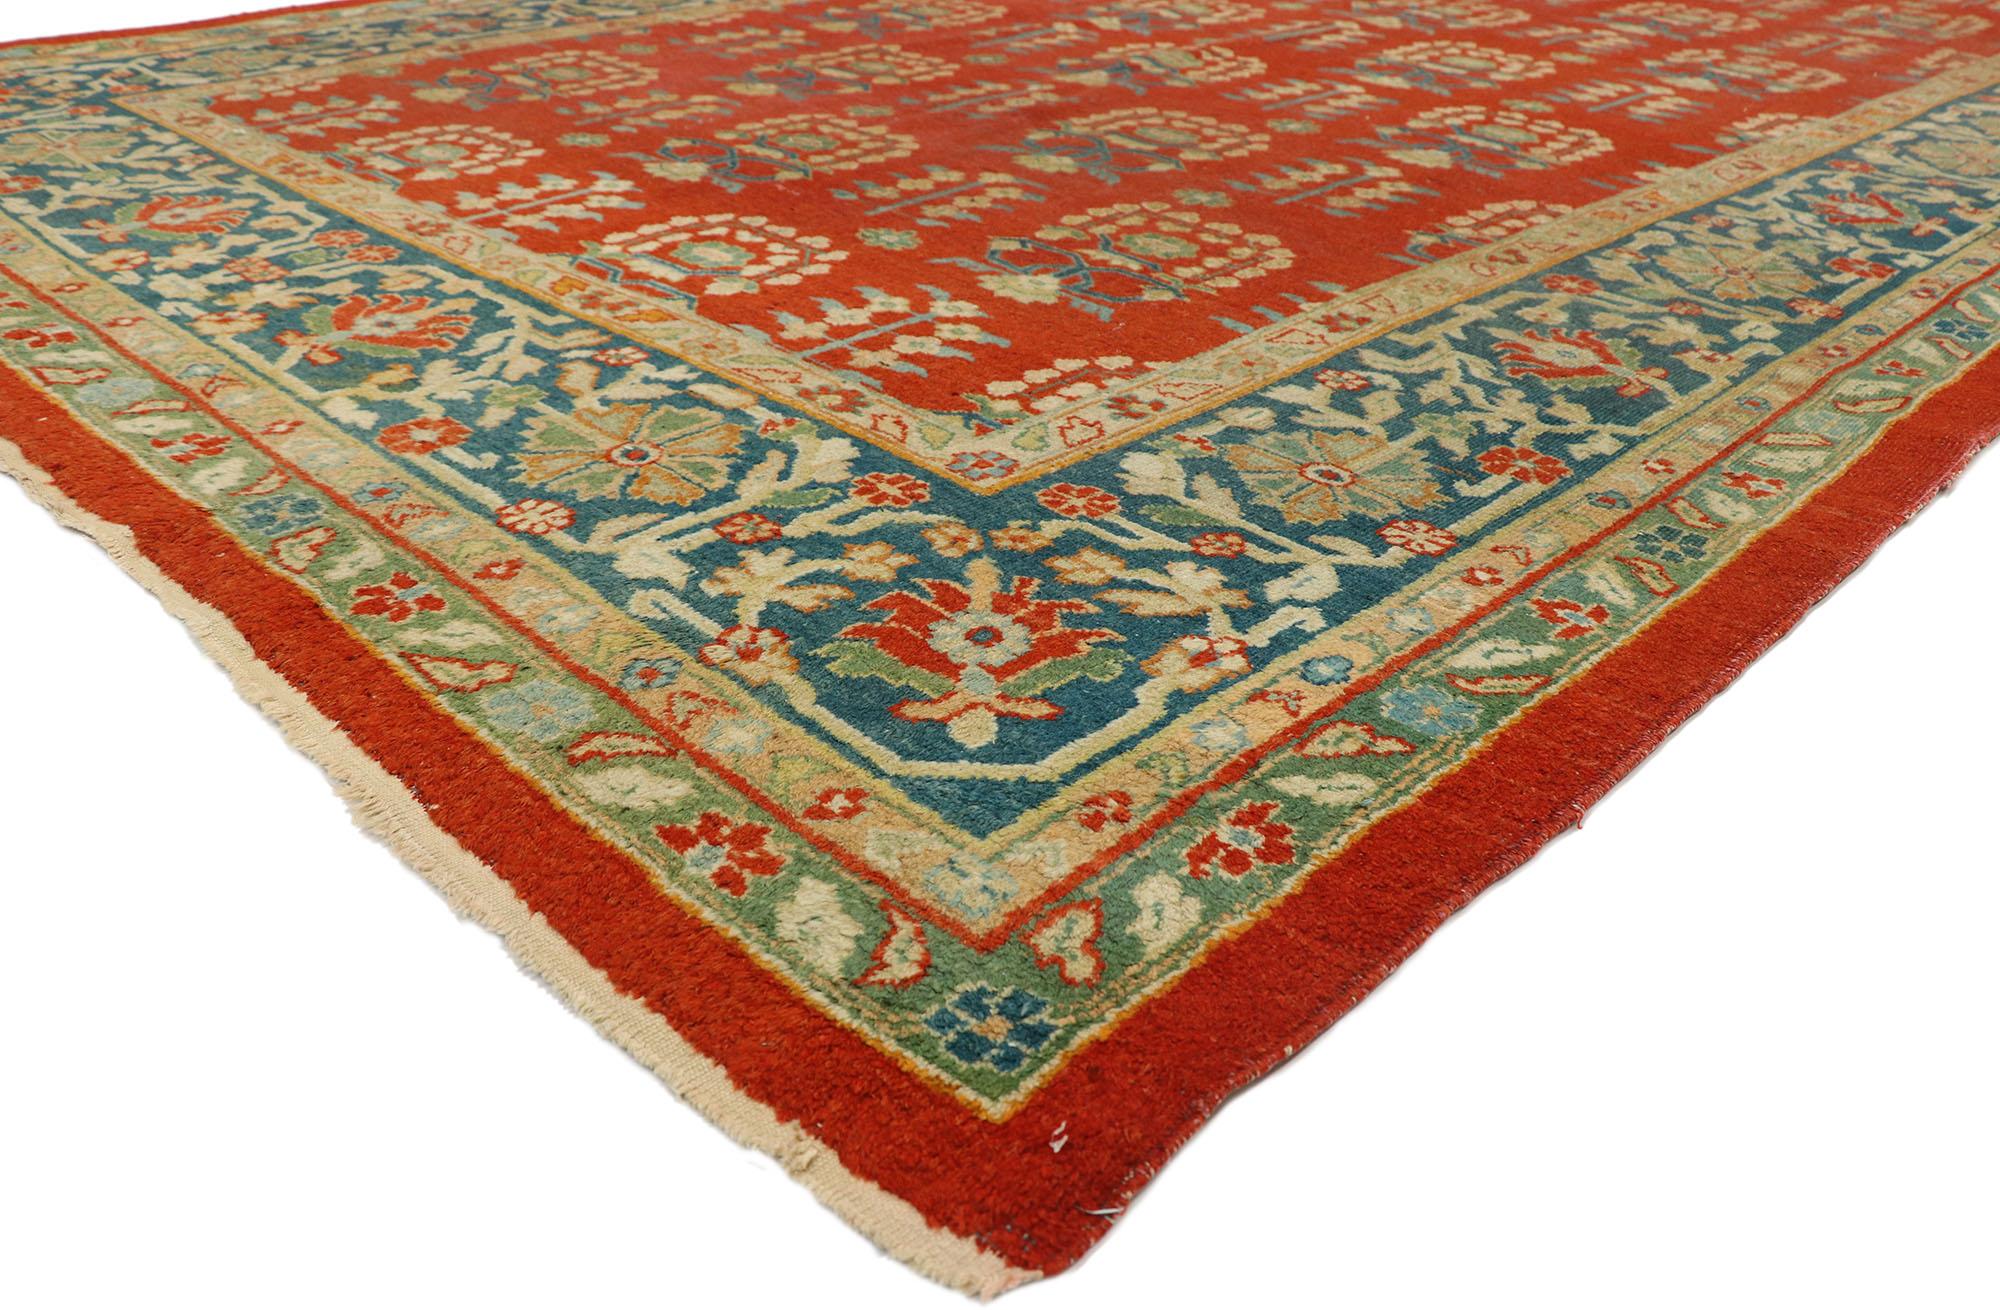 70773 Antique Indian Agra Rug 08’00 x 14’09. Cleverly composed and distinctively well-balanced, this antique Indian Agra rug with modern traditional style displays an exceptional repeating geometric pattern. Rendered in time-softened colors of red,